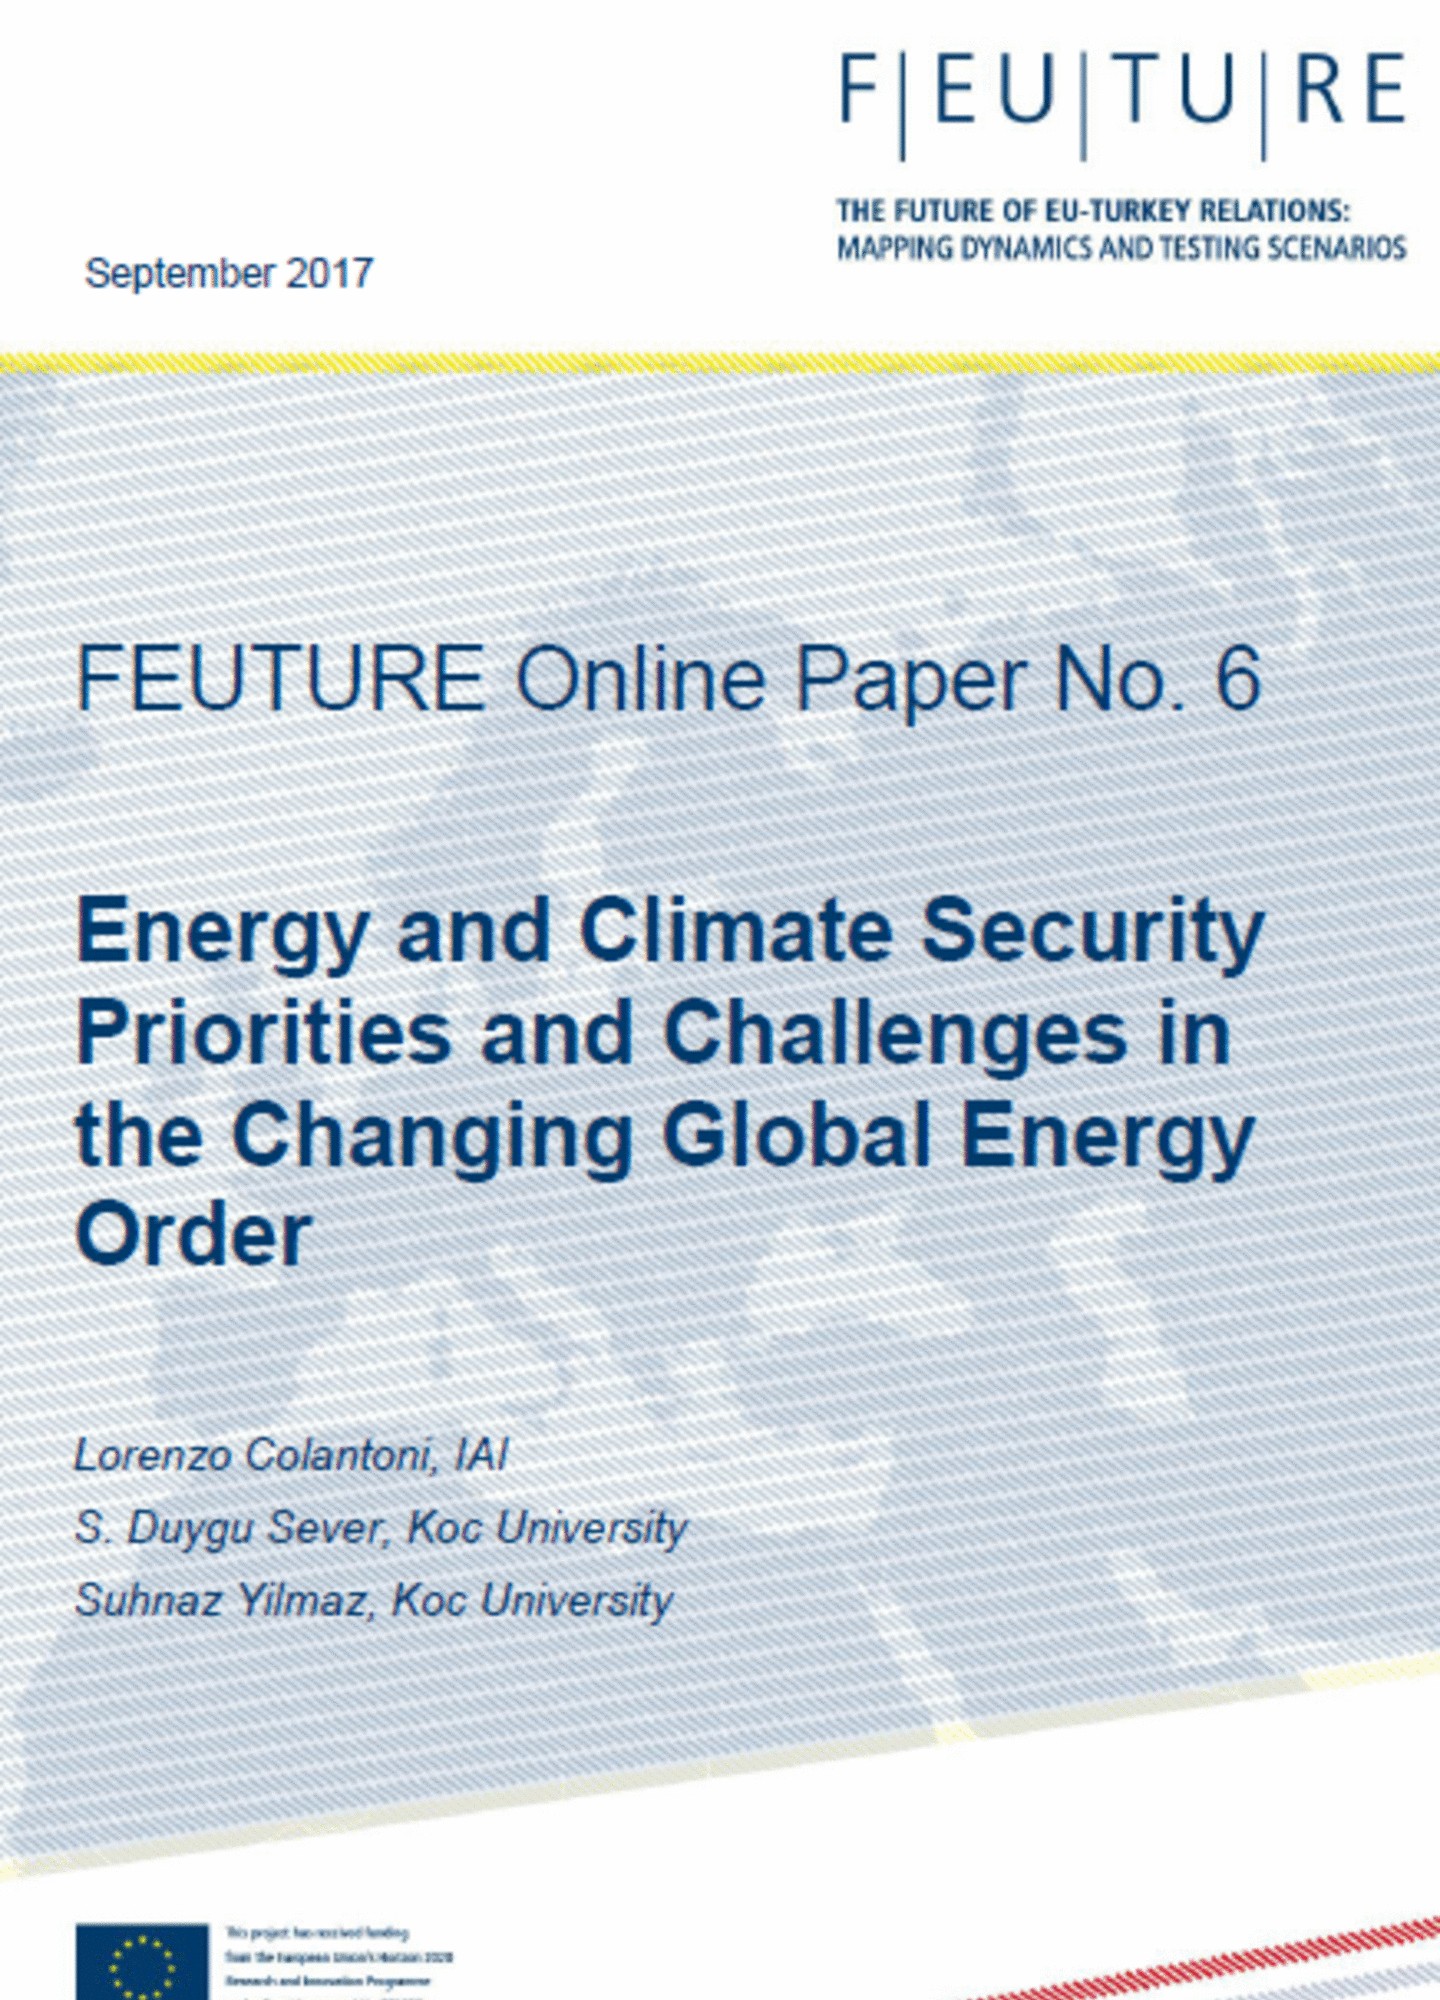 Energy and Climate Security Priorities and Challenges in the Changing Global Energy Order